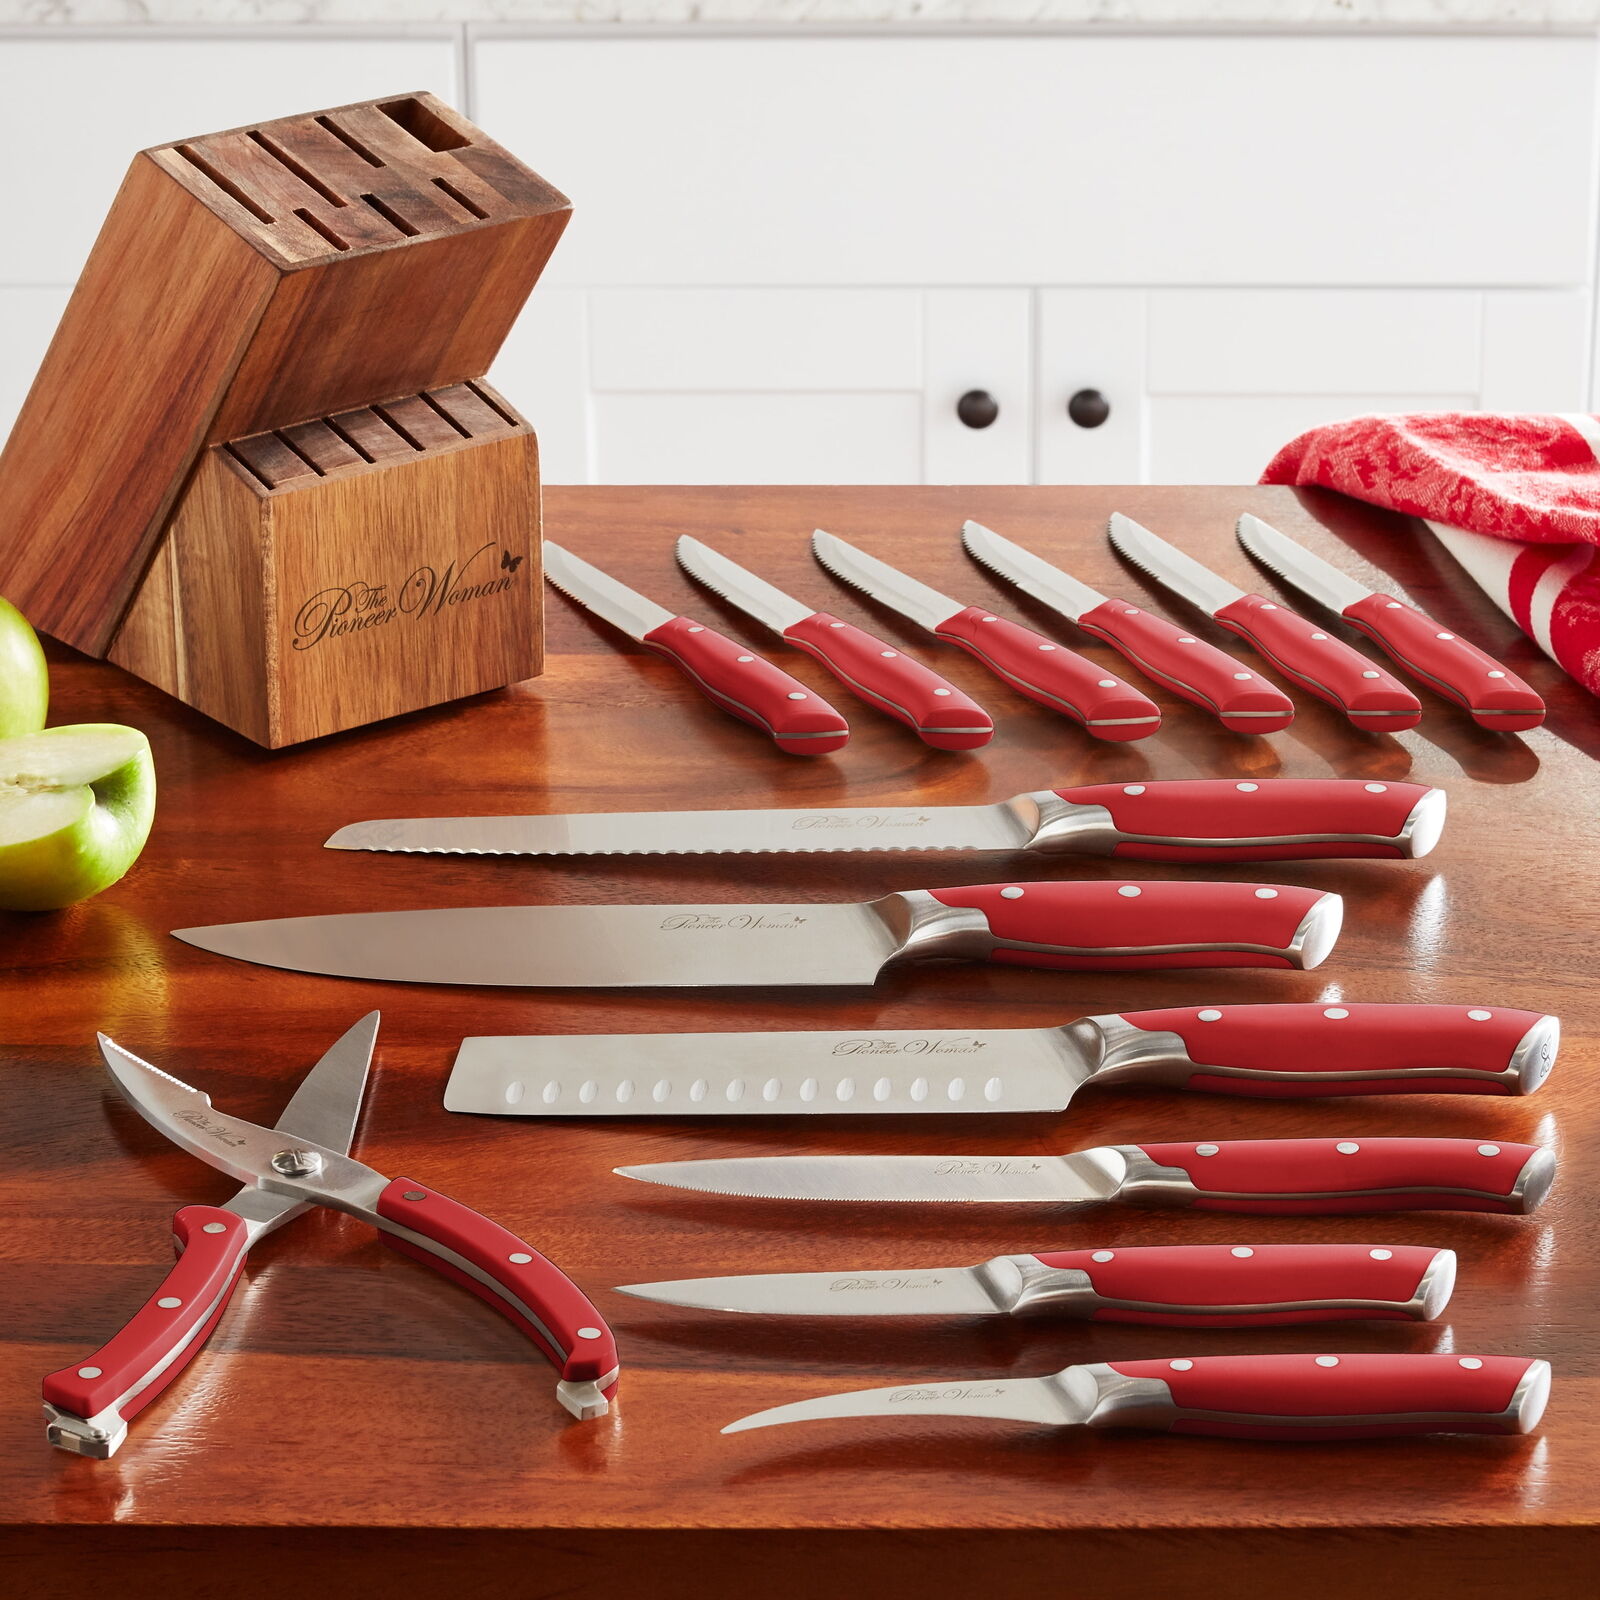 The Pioneer Woman Pioneer Signature 14-Piece Stainless Steel Knife Block Set,Red Does not apply - фотография #3